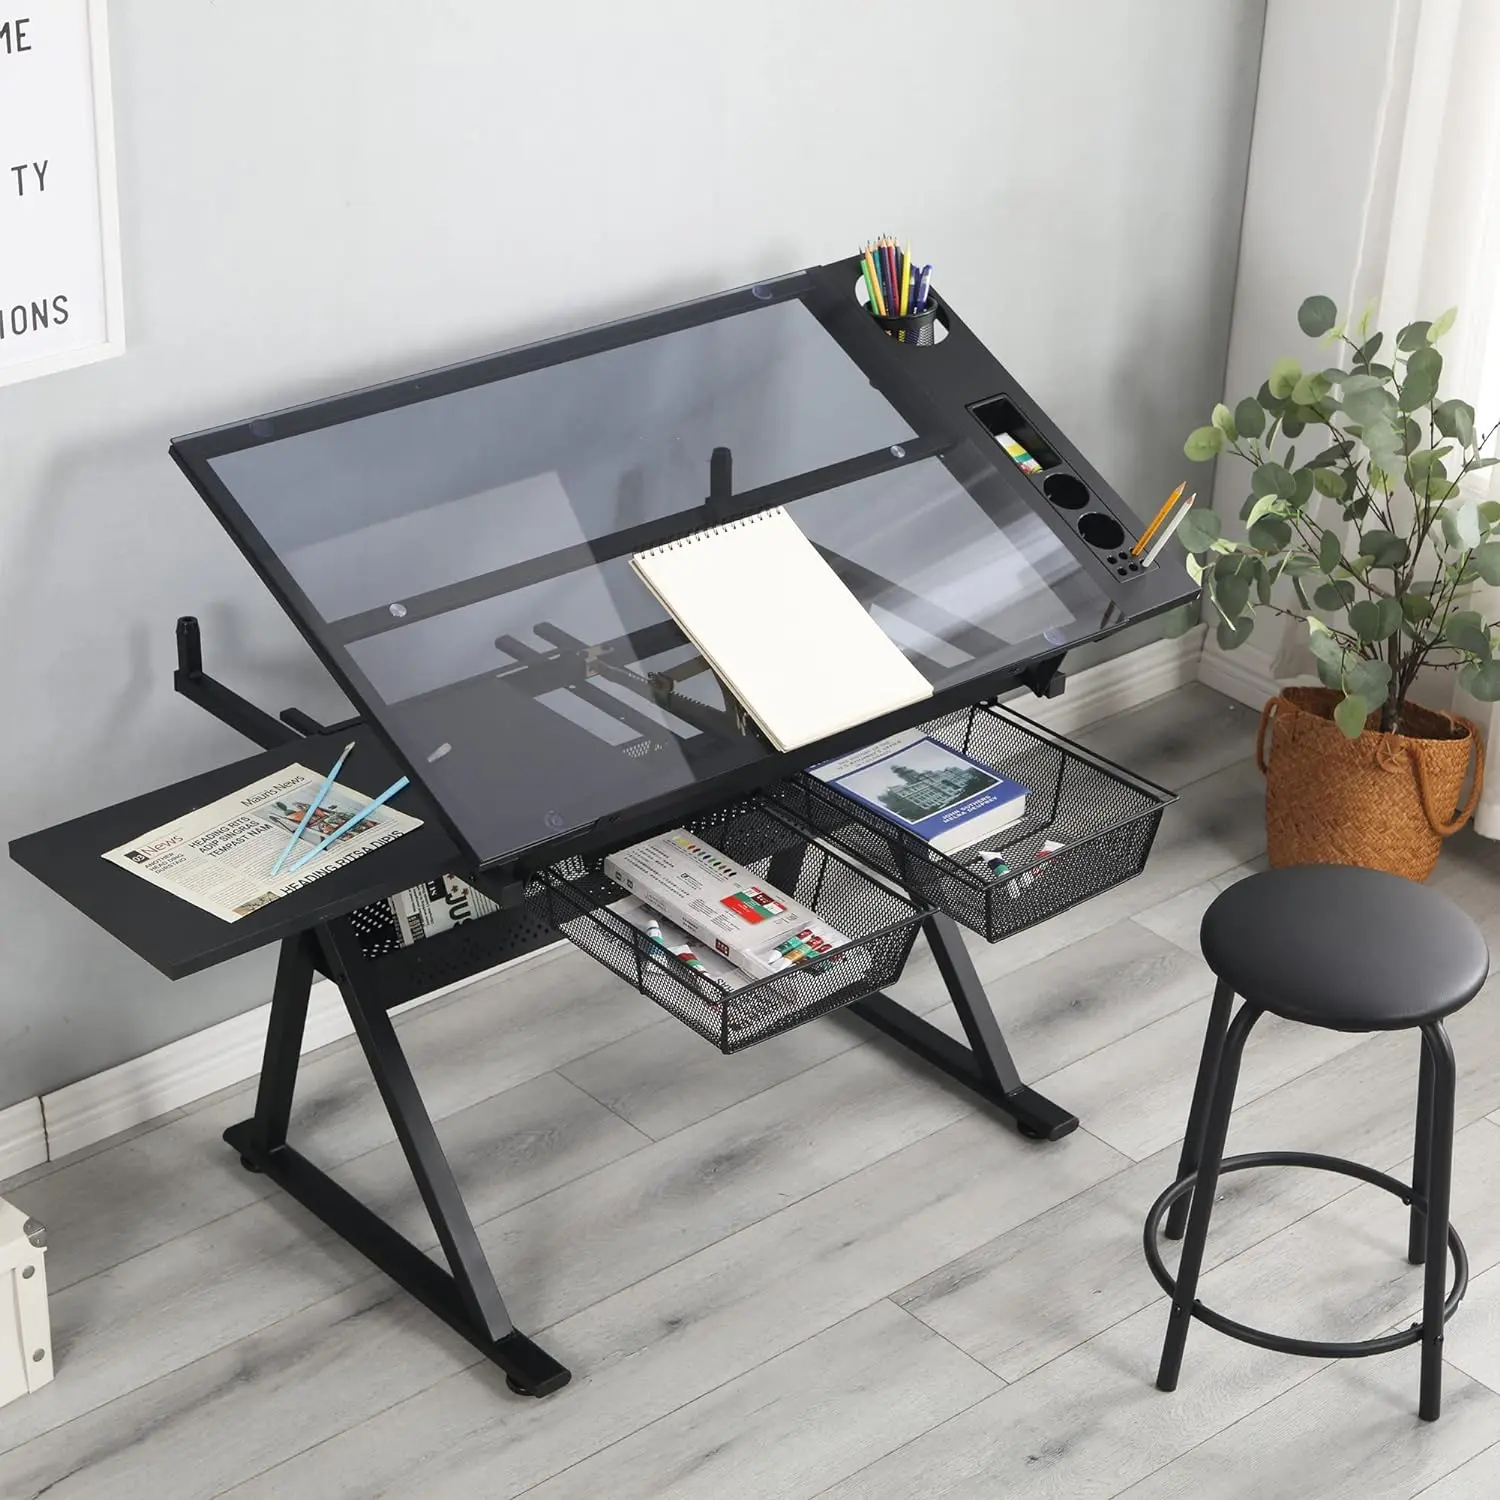 

Height Adjustable Drafting Table - Modern Tempered Glasses Artist Drawing Table Tilted Tabletop with Chair,Glass Topped Art